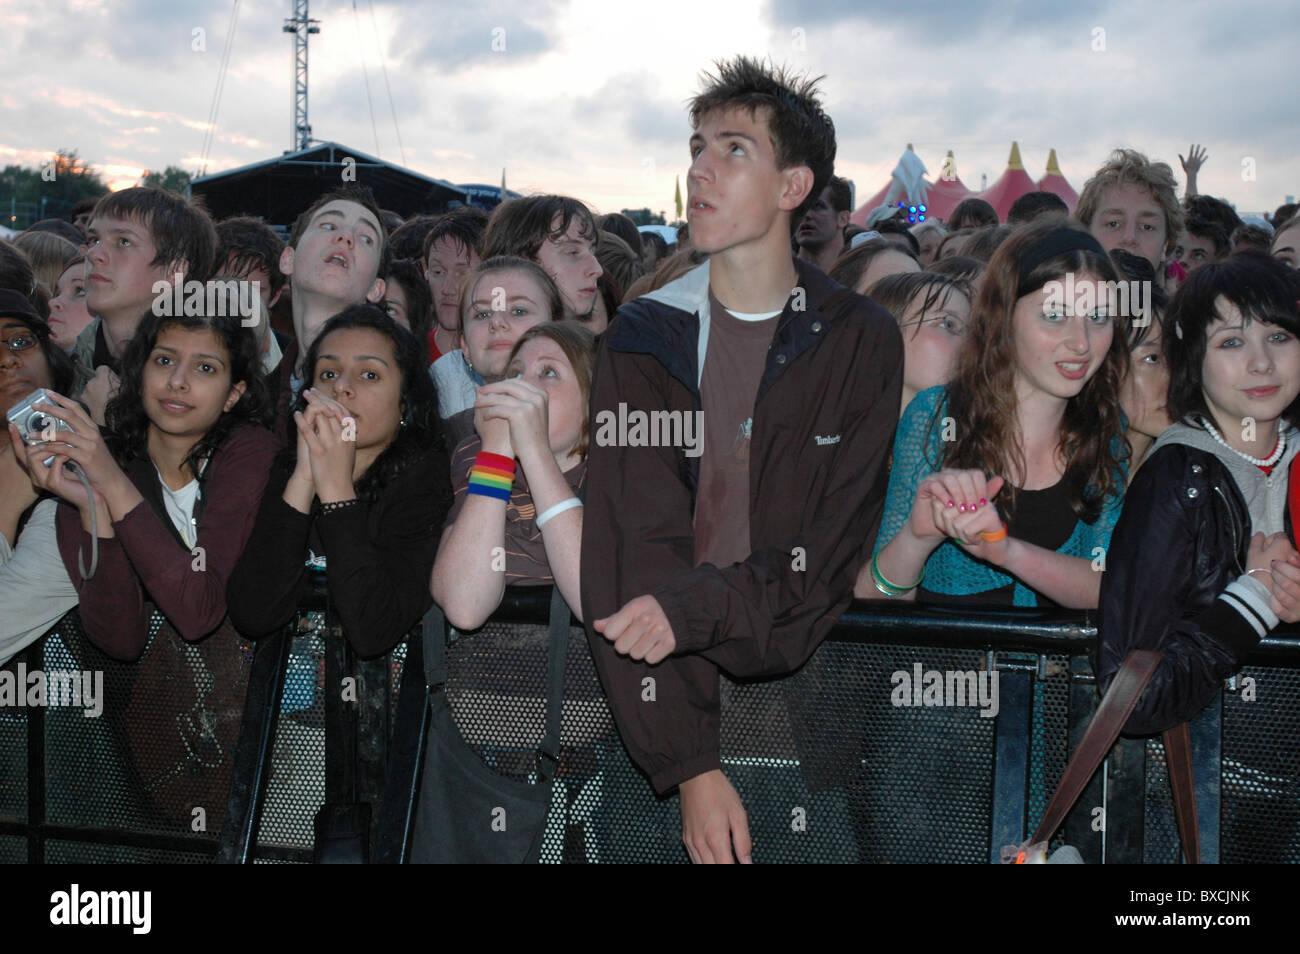 Crowds At Outdoor Concerts Stock Photo Alamy